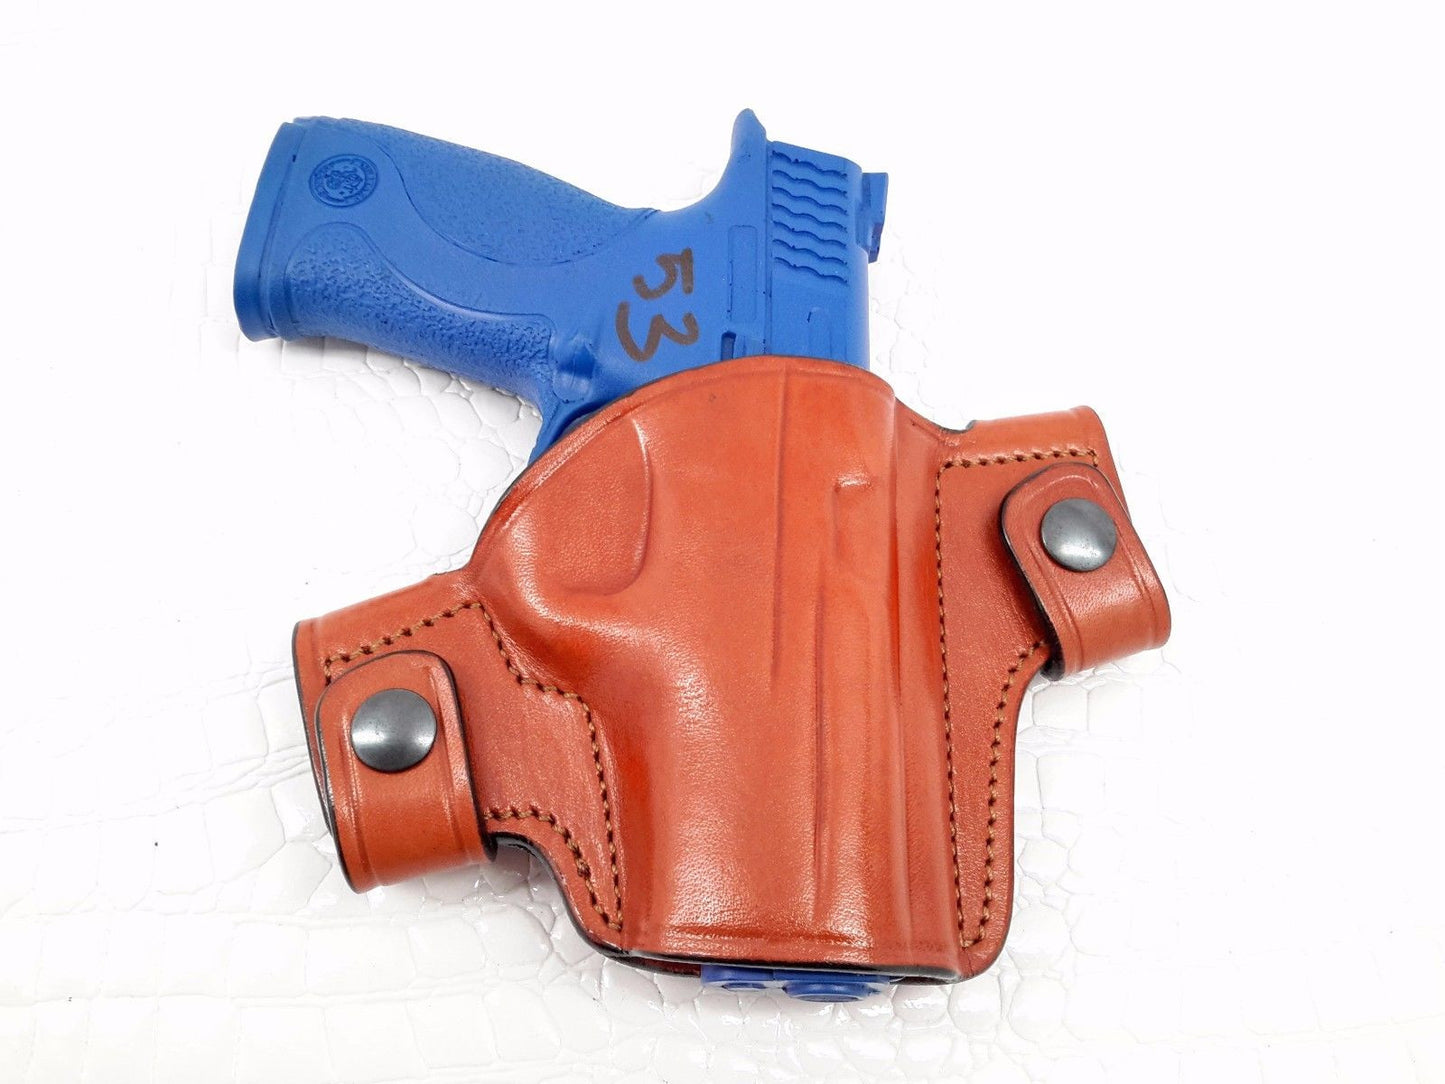 Snap-on Holster for Smith & Wesson M&P 45 4.5", MyHolster